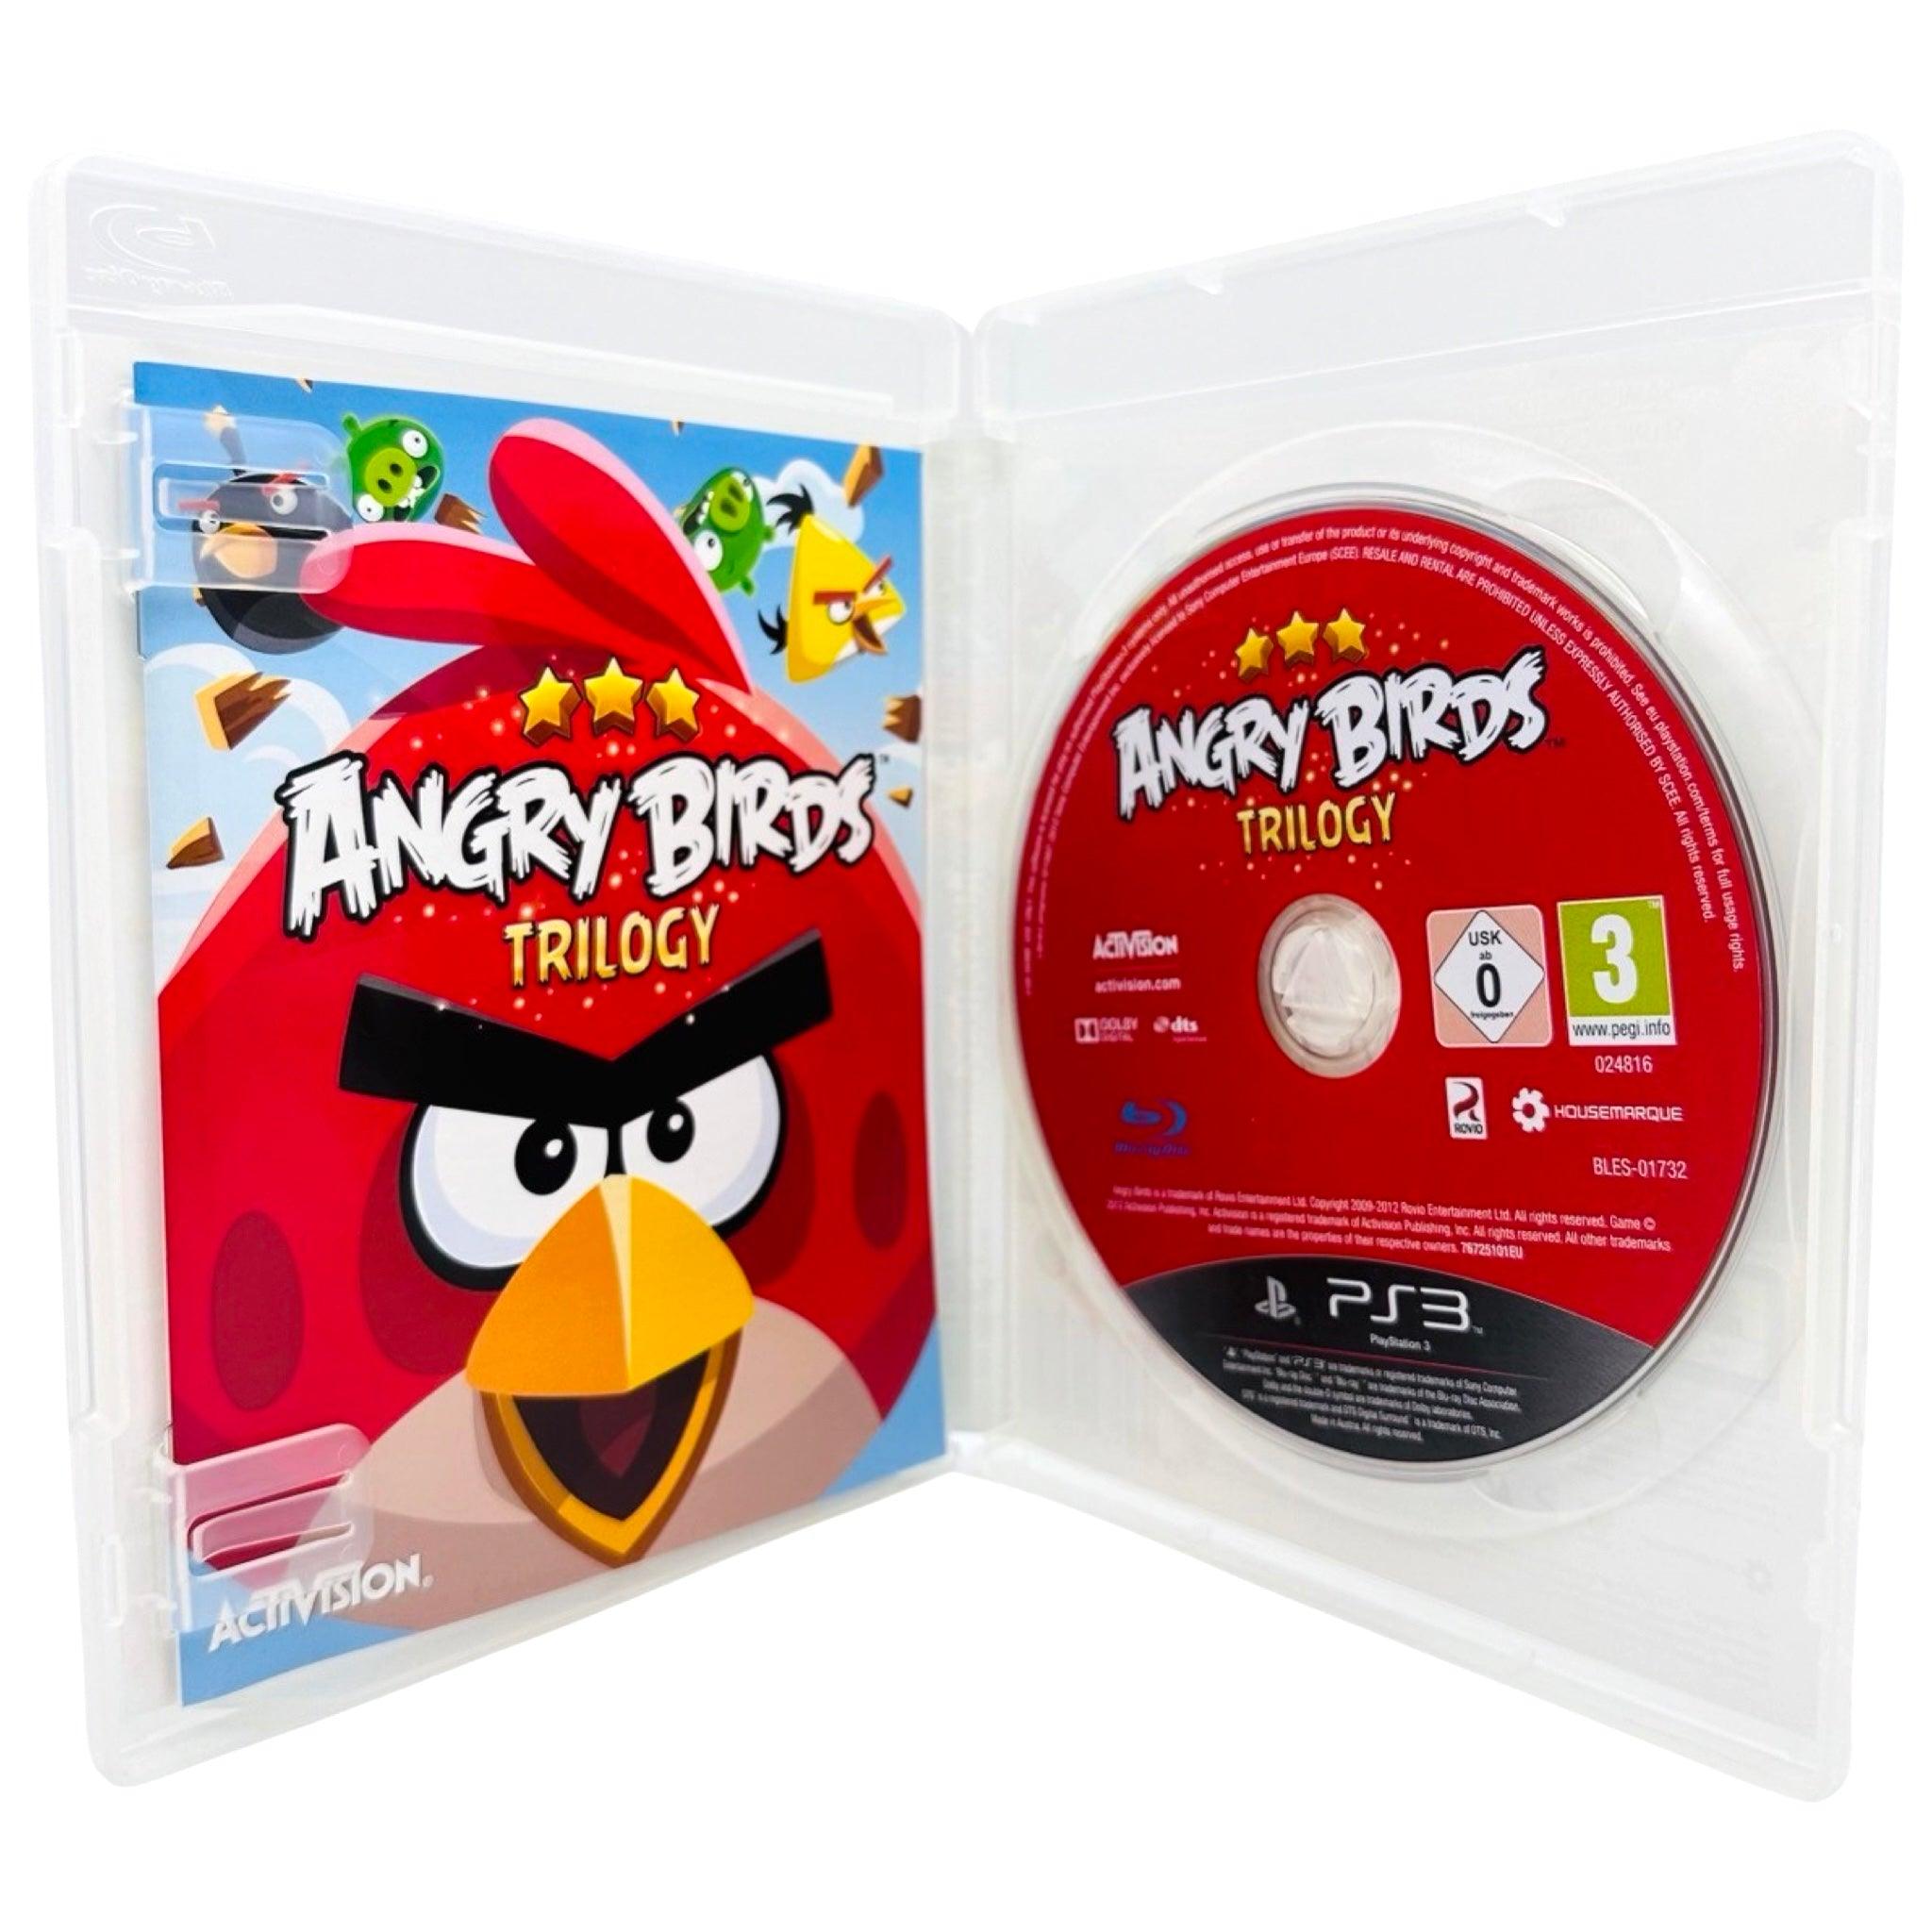 PS3: Angry Birds Trilogy - RetroGaming.no